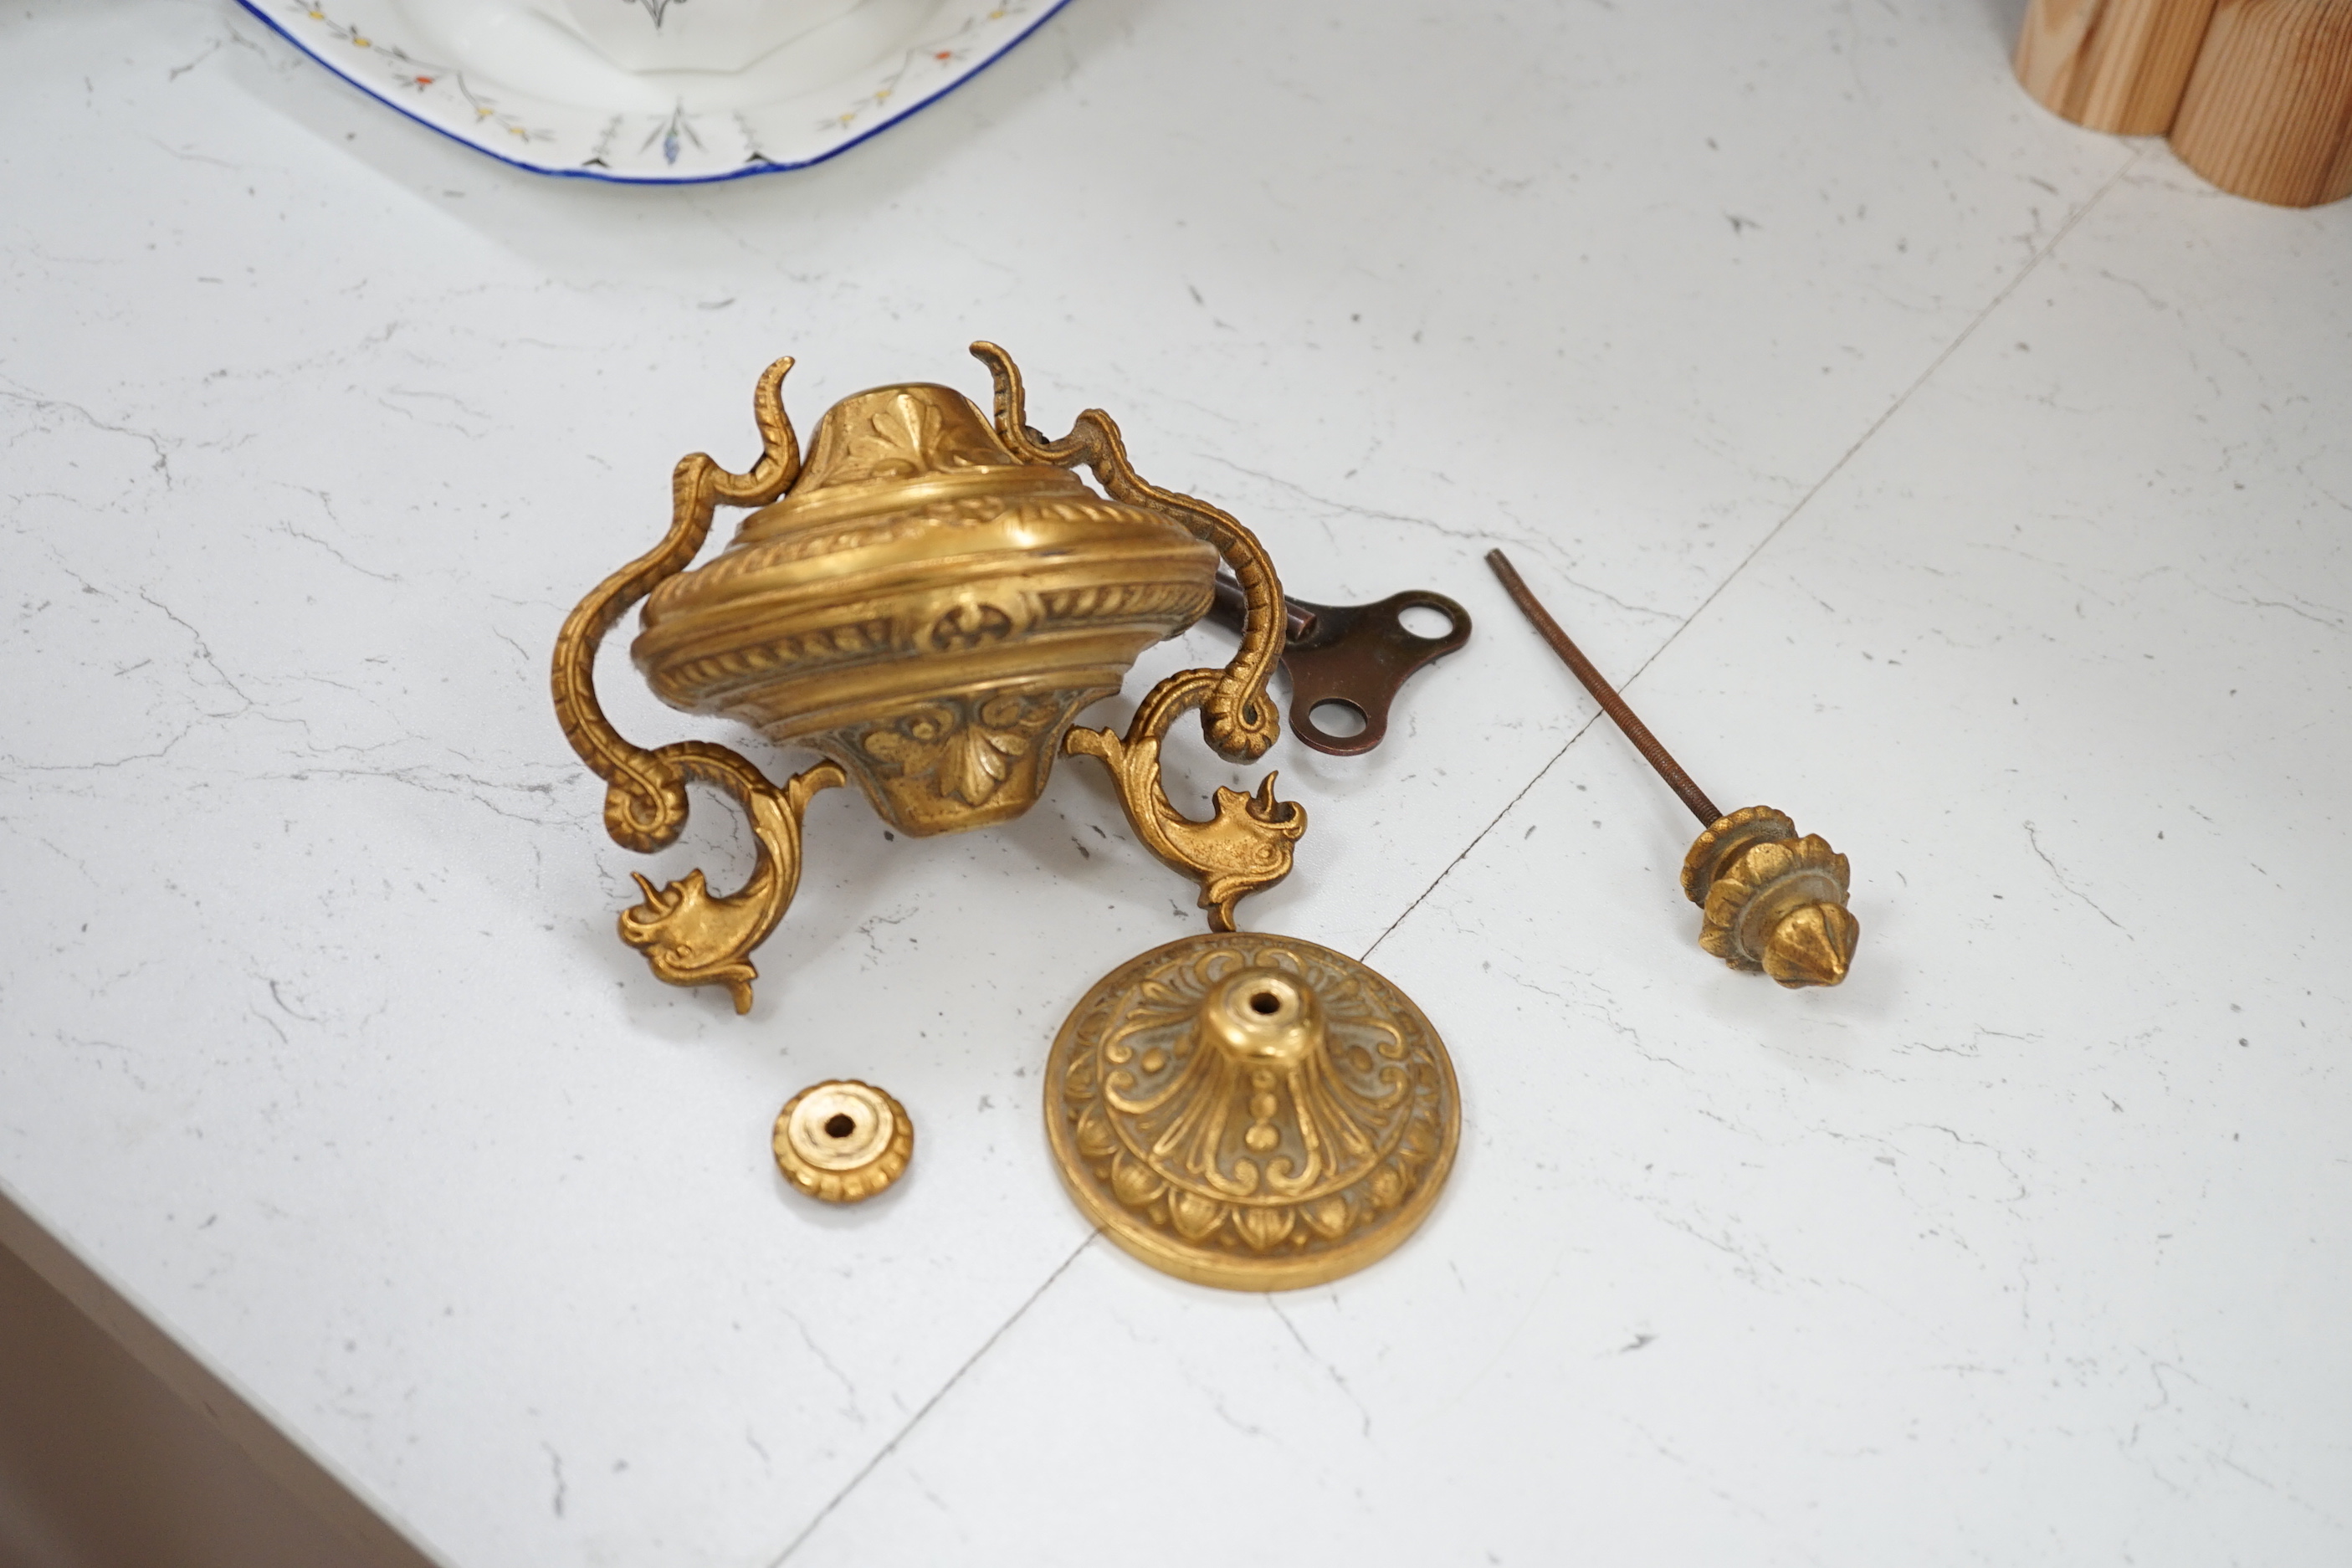 A 19th century French brass mantel clock- no pendulum, loose finial, 37cm excl finial